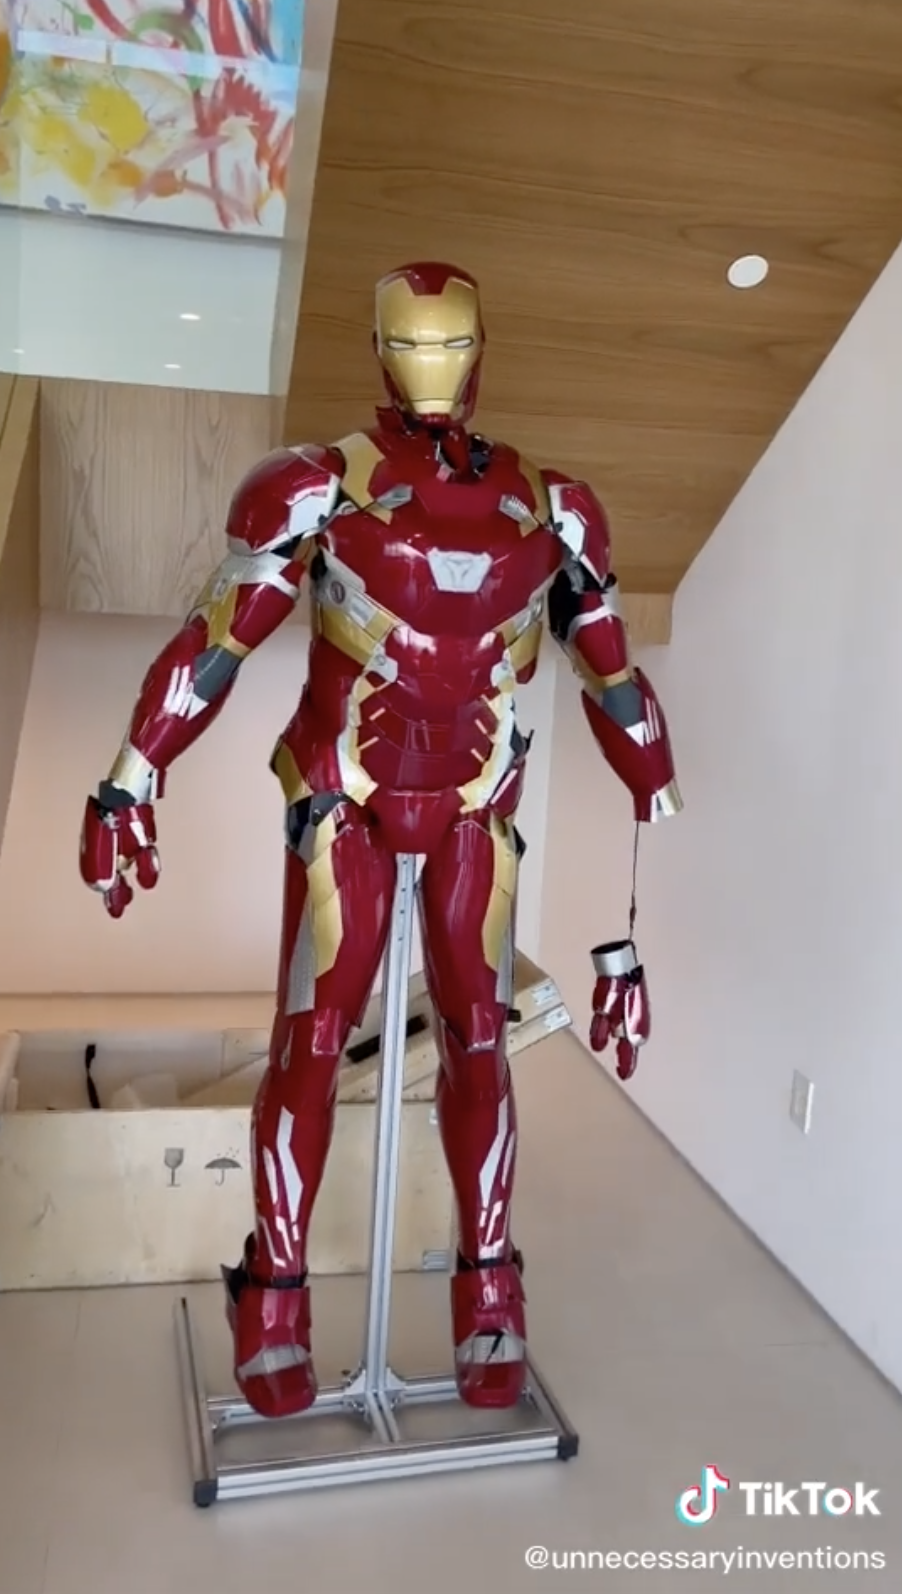 The Ironman suit